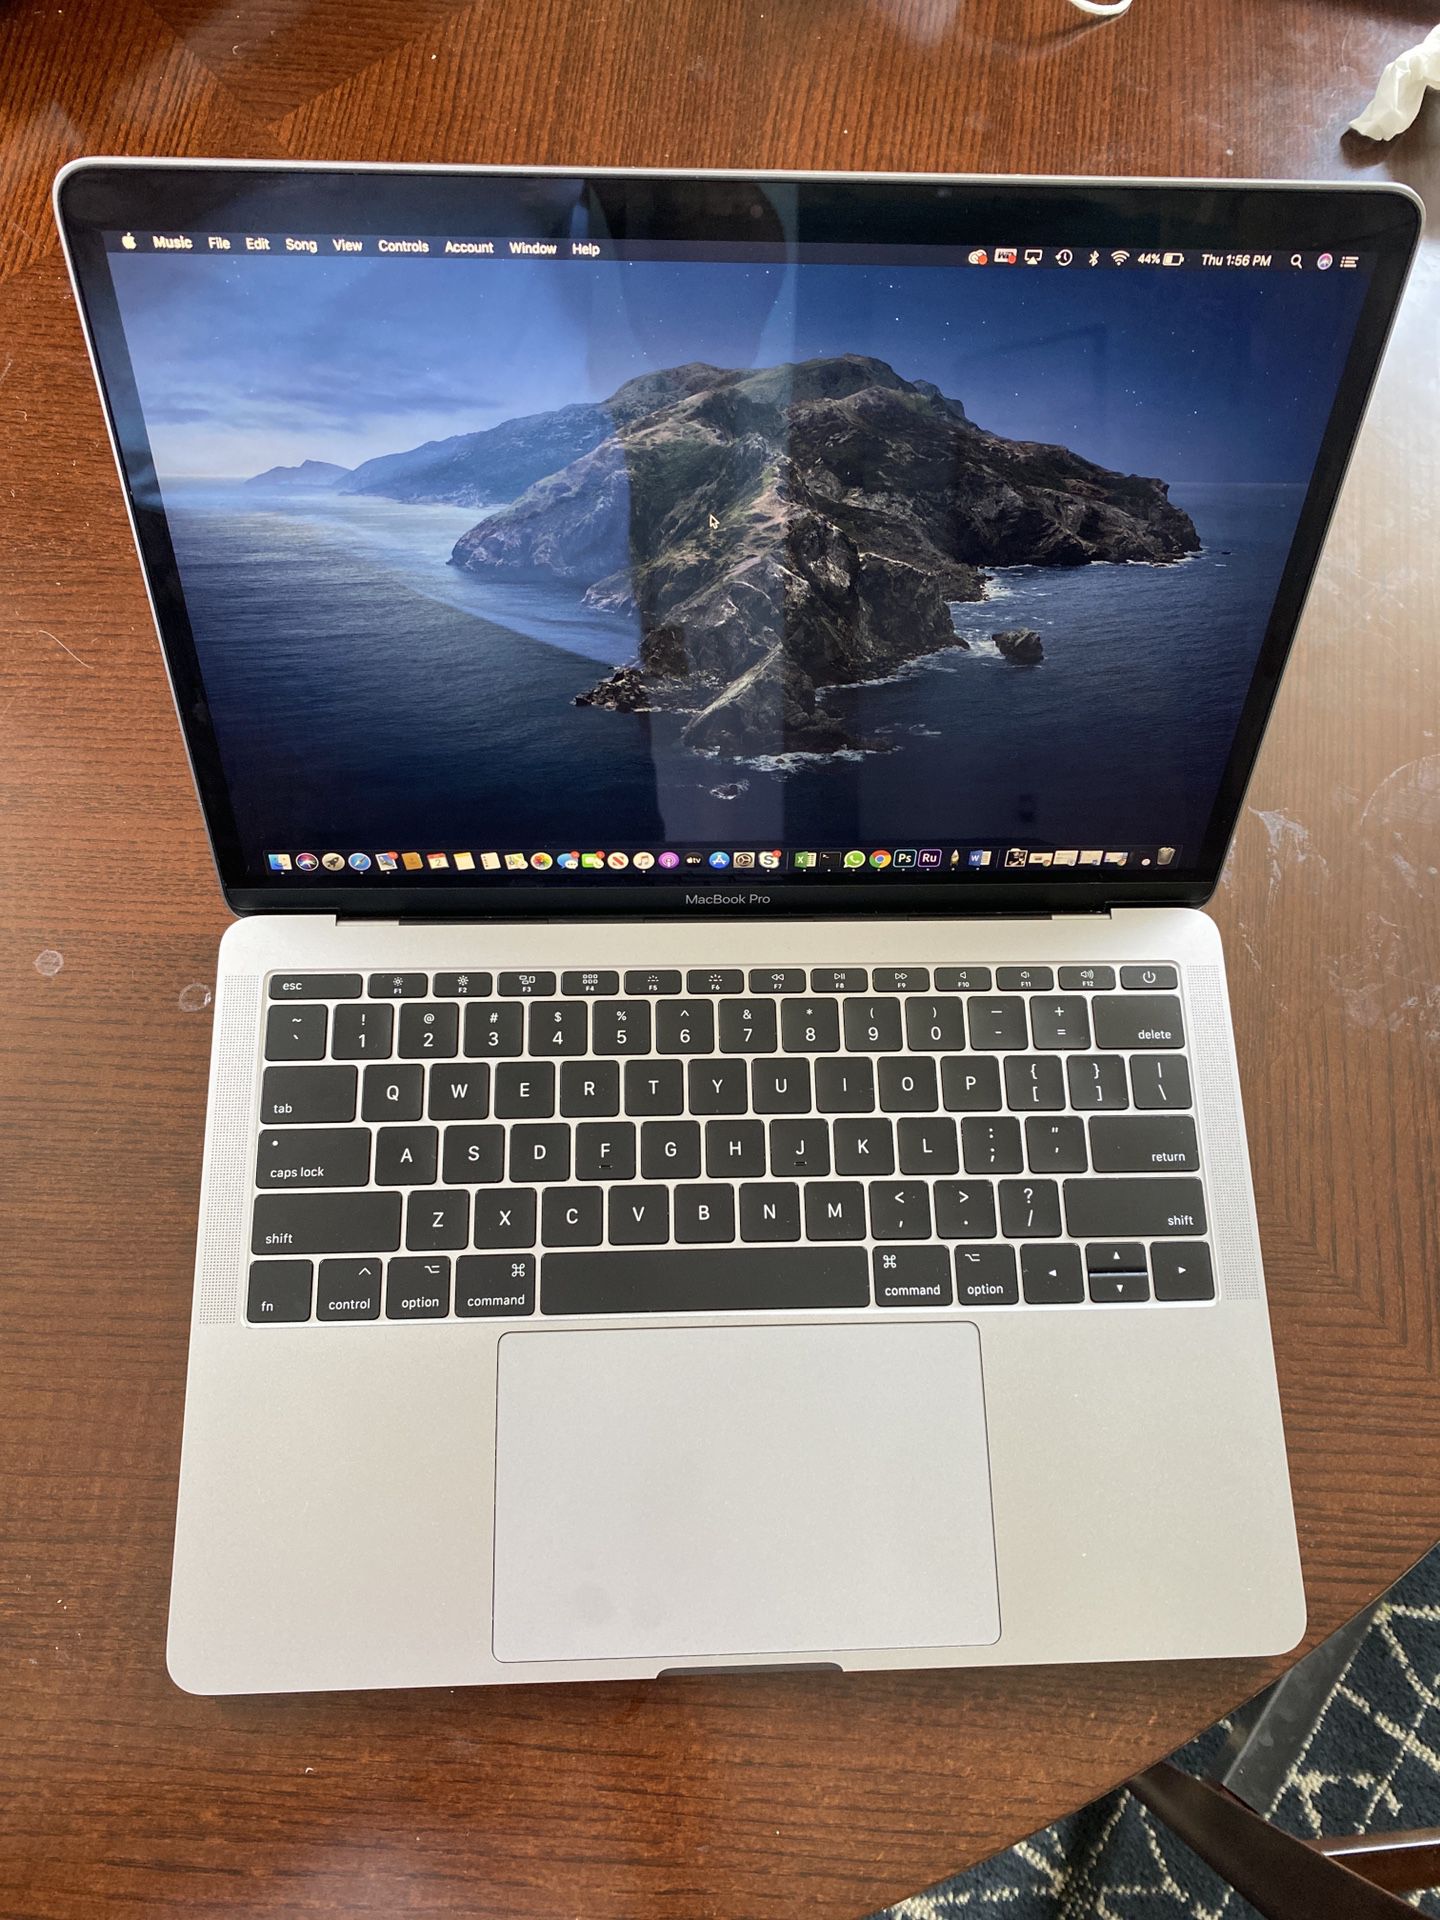 Macbook pro - 13 inch , Core i5 , 8gb RAM , 256 GB SSD with latest OS -Model 2017, purchased in 2019